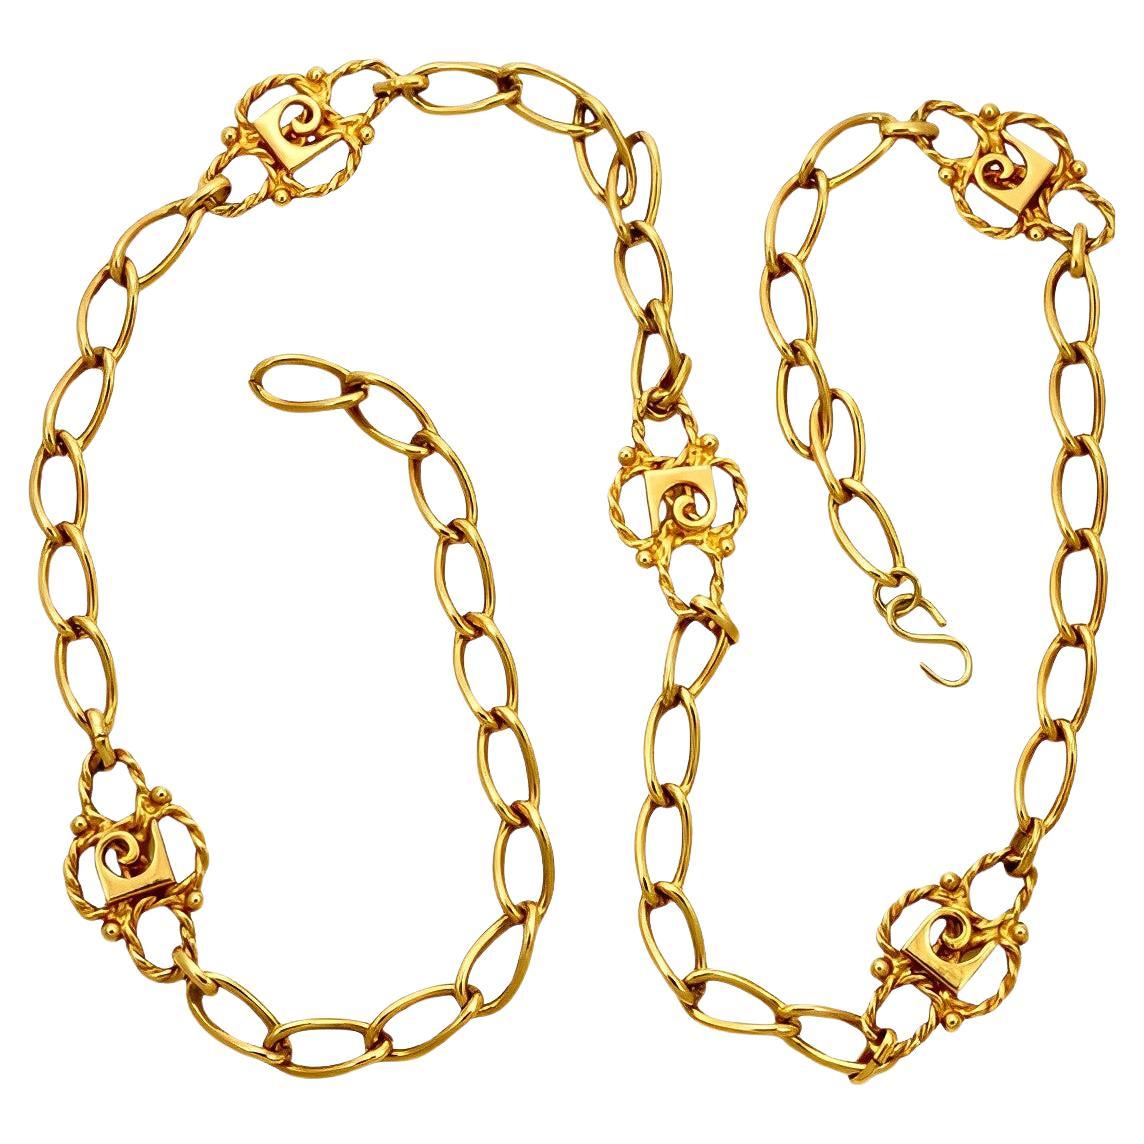 Pierre Cardin Monogram Gold Plated Chain Link Belt circa 1970s For Sale